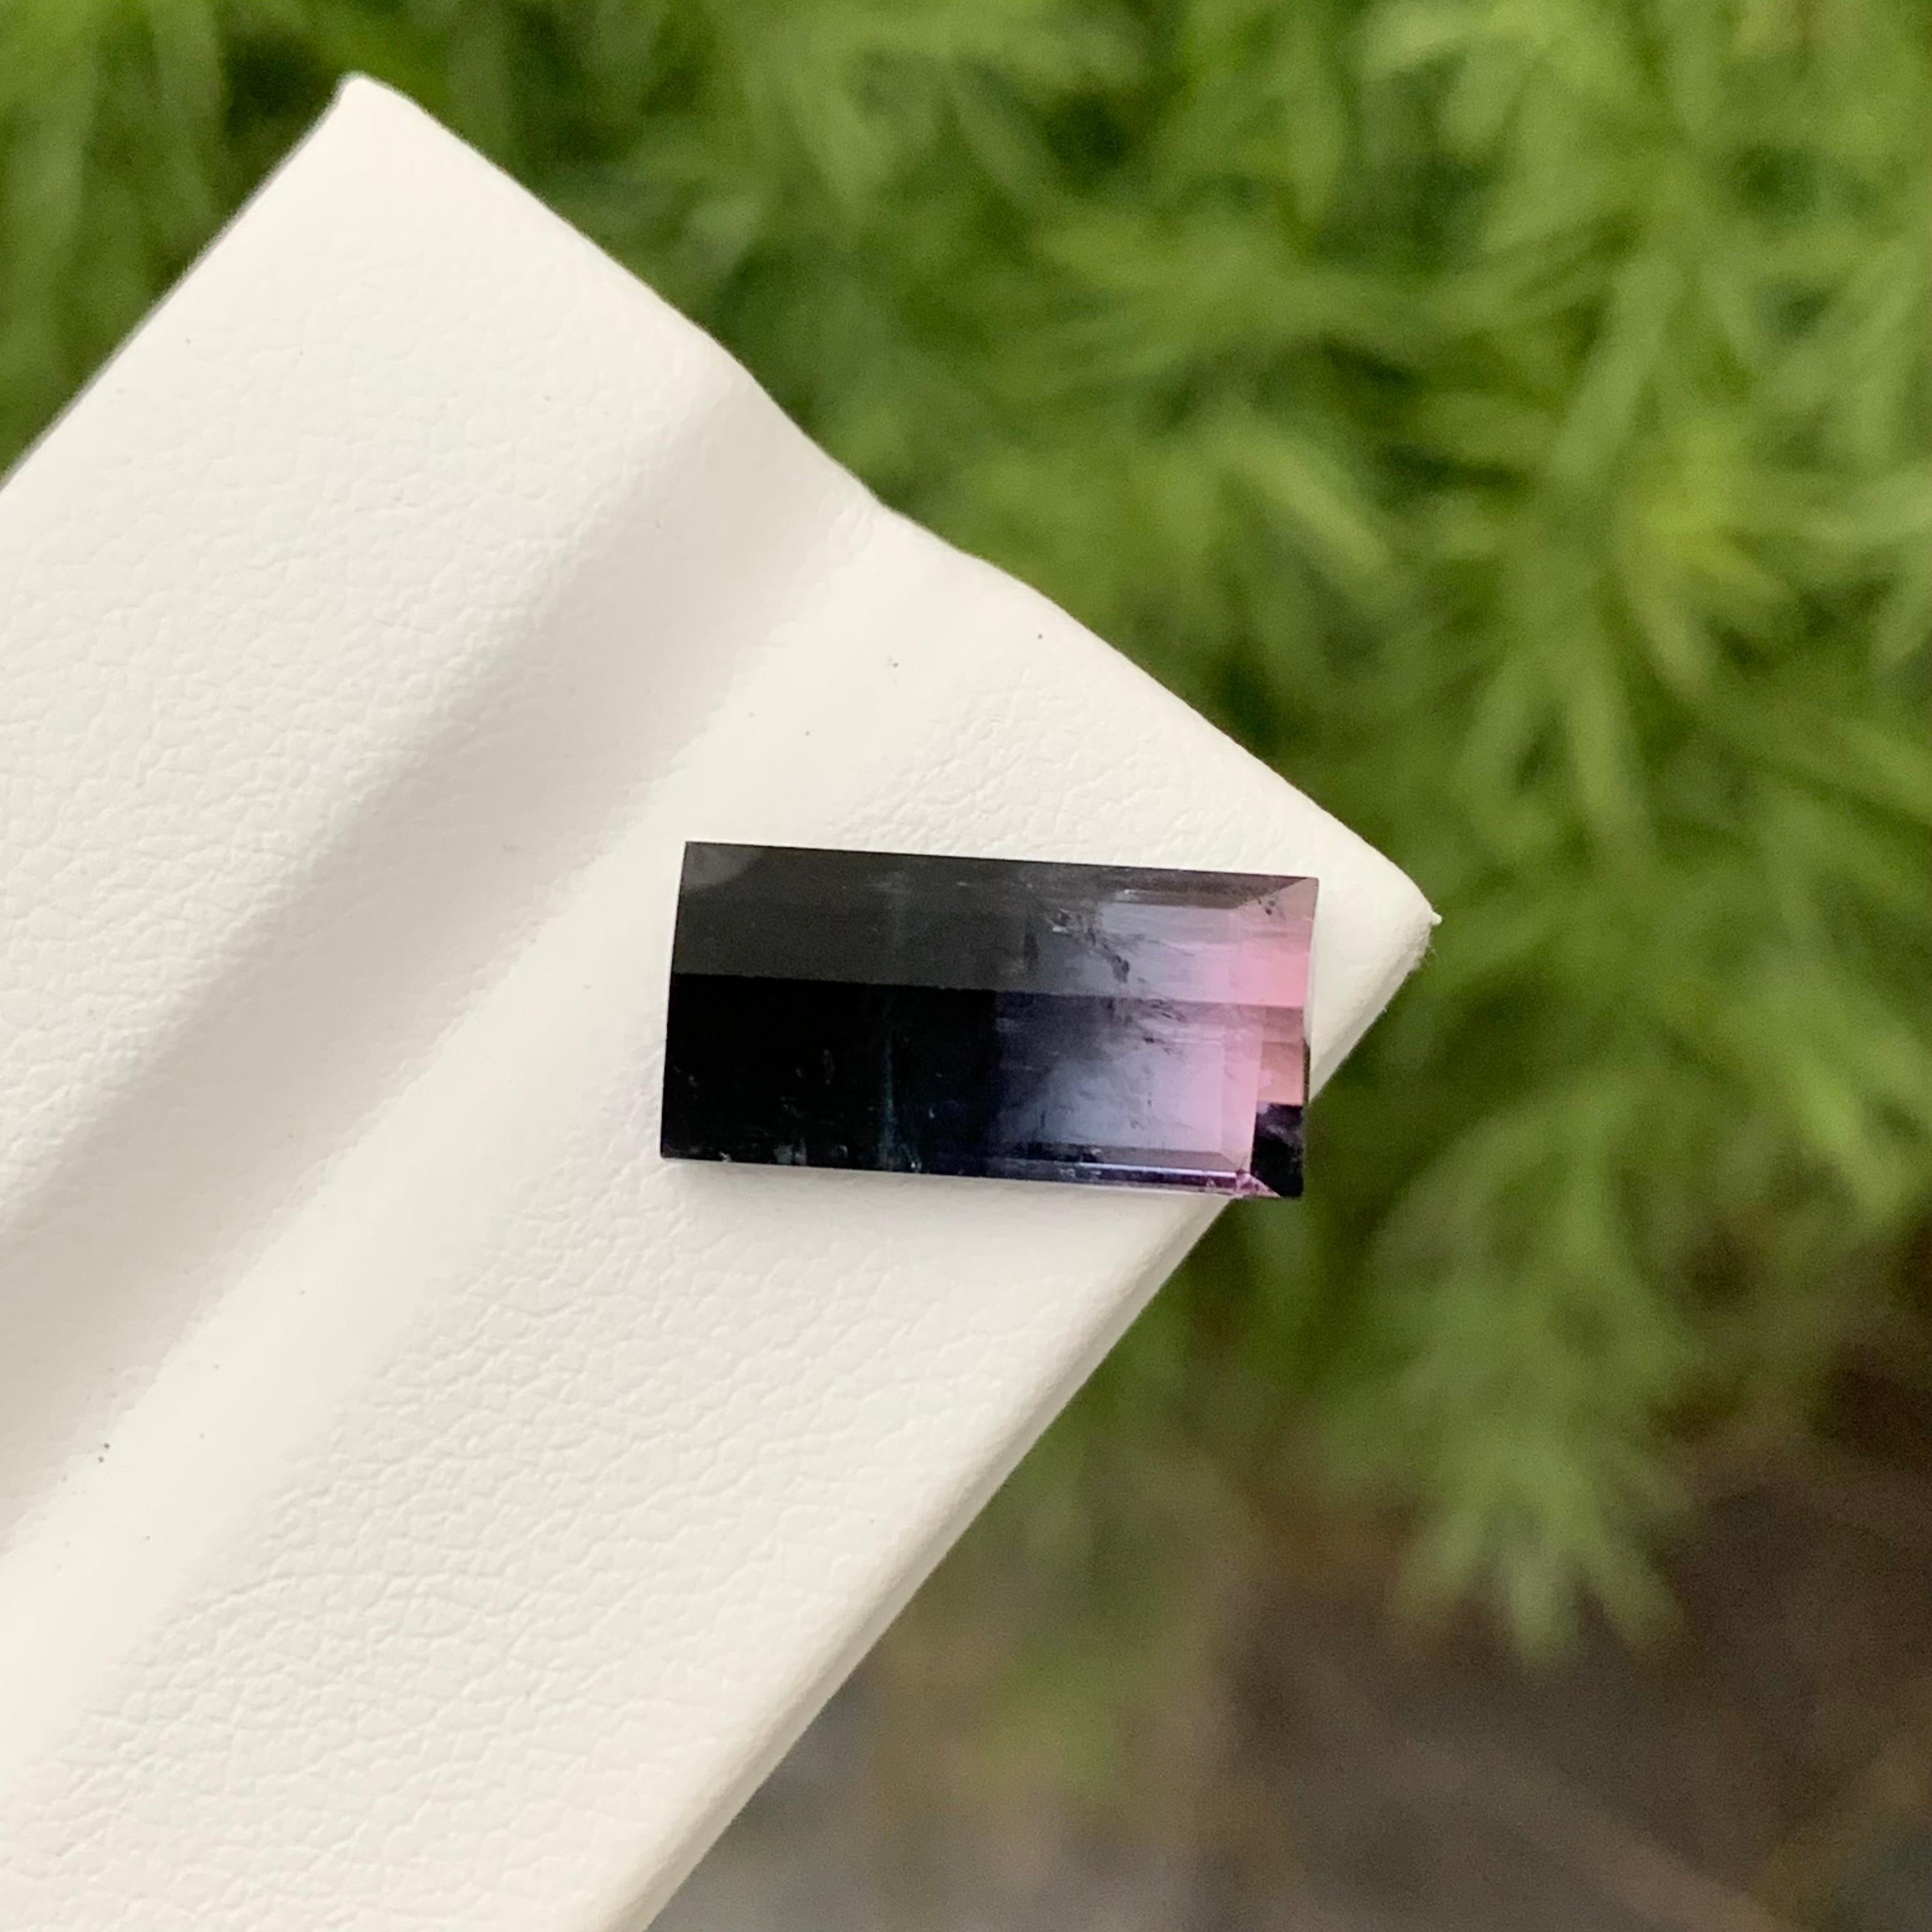 Loose Tourmaline 
Weight: 5.70 Carats 
Dimension: 15x7.6x4.9 Mm
Origin: Stak Nala Skardu Pakistan 
Shape: Baguette
Color: Pink & Black
Treatment: Non
Pink and black bicolor tourmaline is a captivating gemstone renowned for its unique color